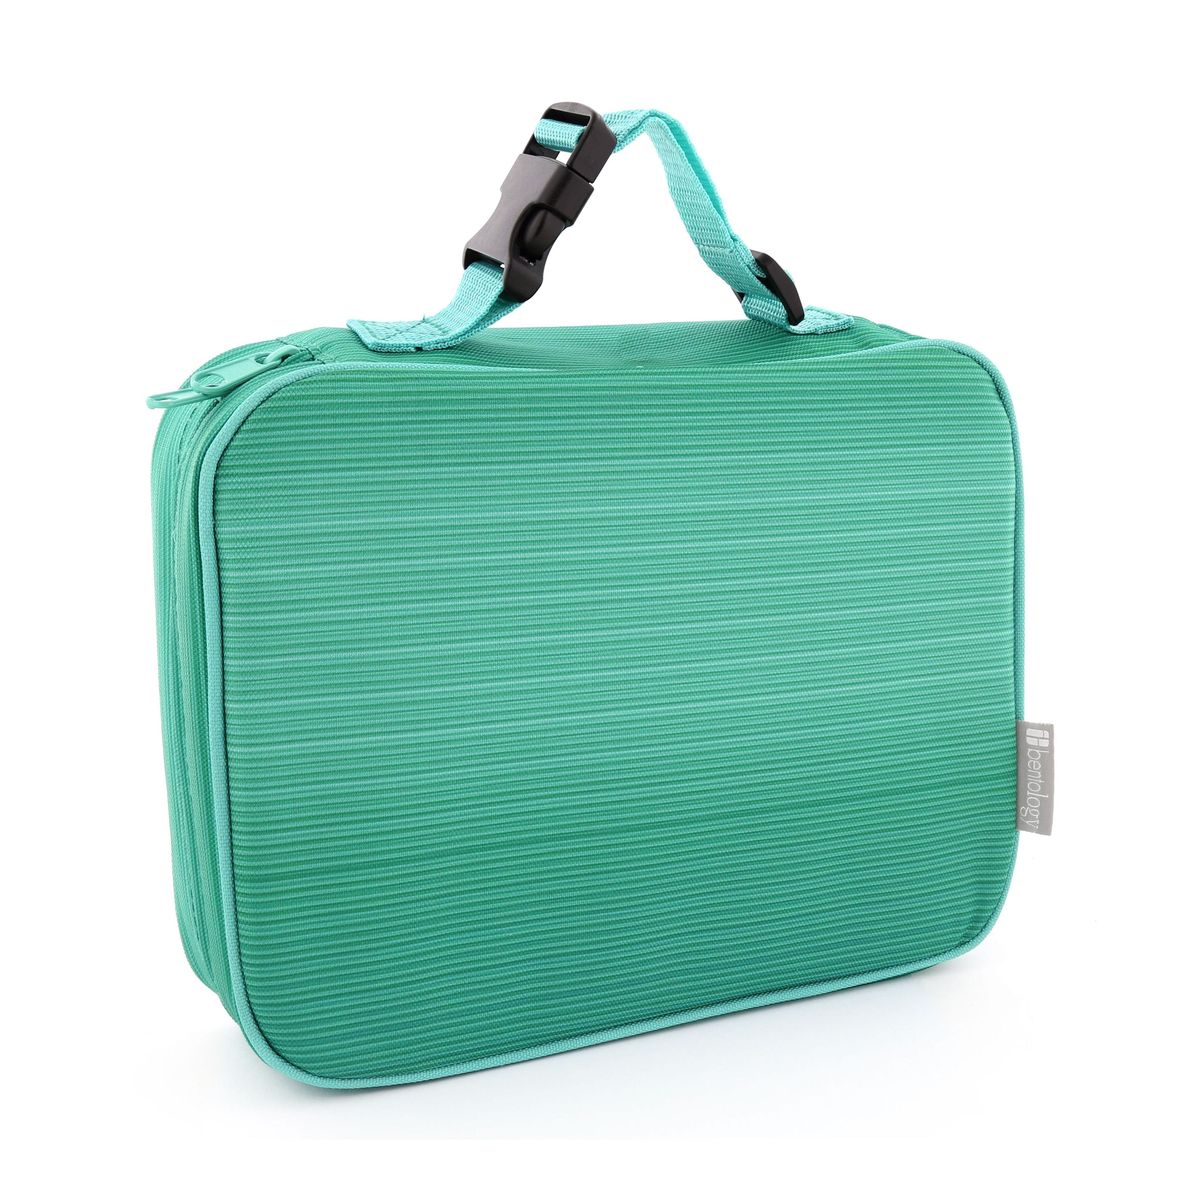 Bentology Complete Lunch Box Set Turquoise (Classic Lunch Box + Bento Box)